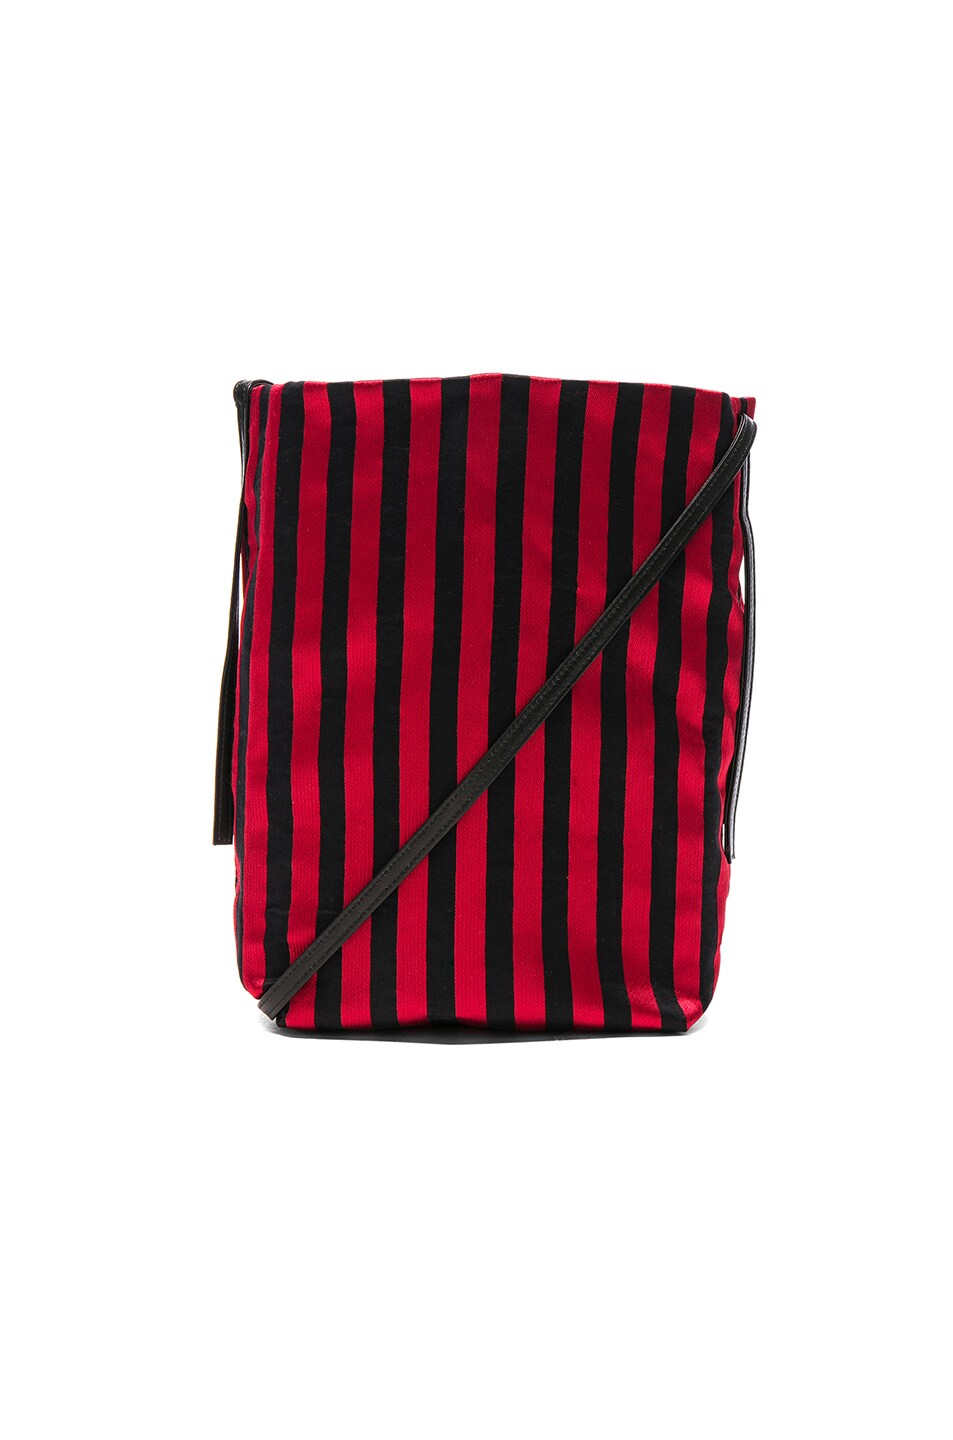 Image 1 of Ann Demeulemeester Striped Satchel in Ruby & Black